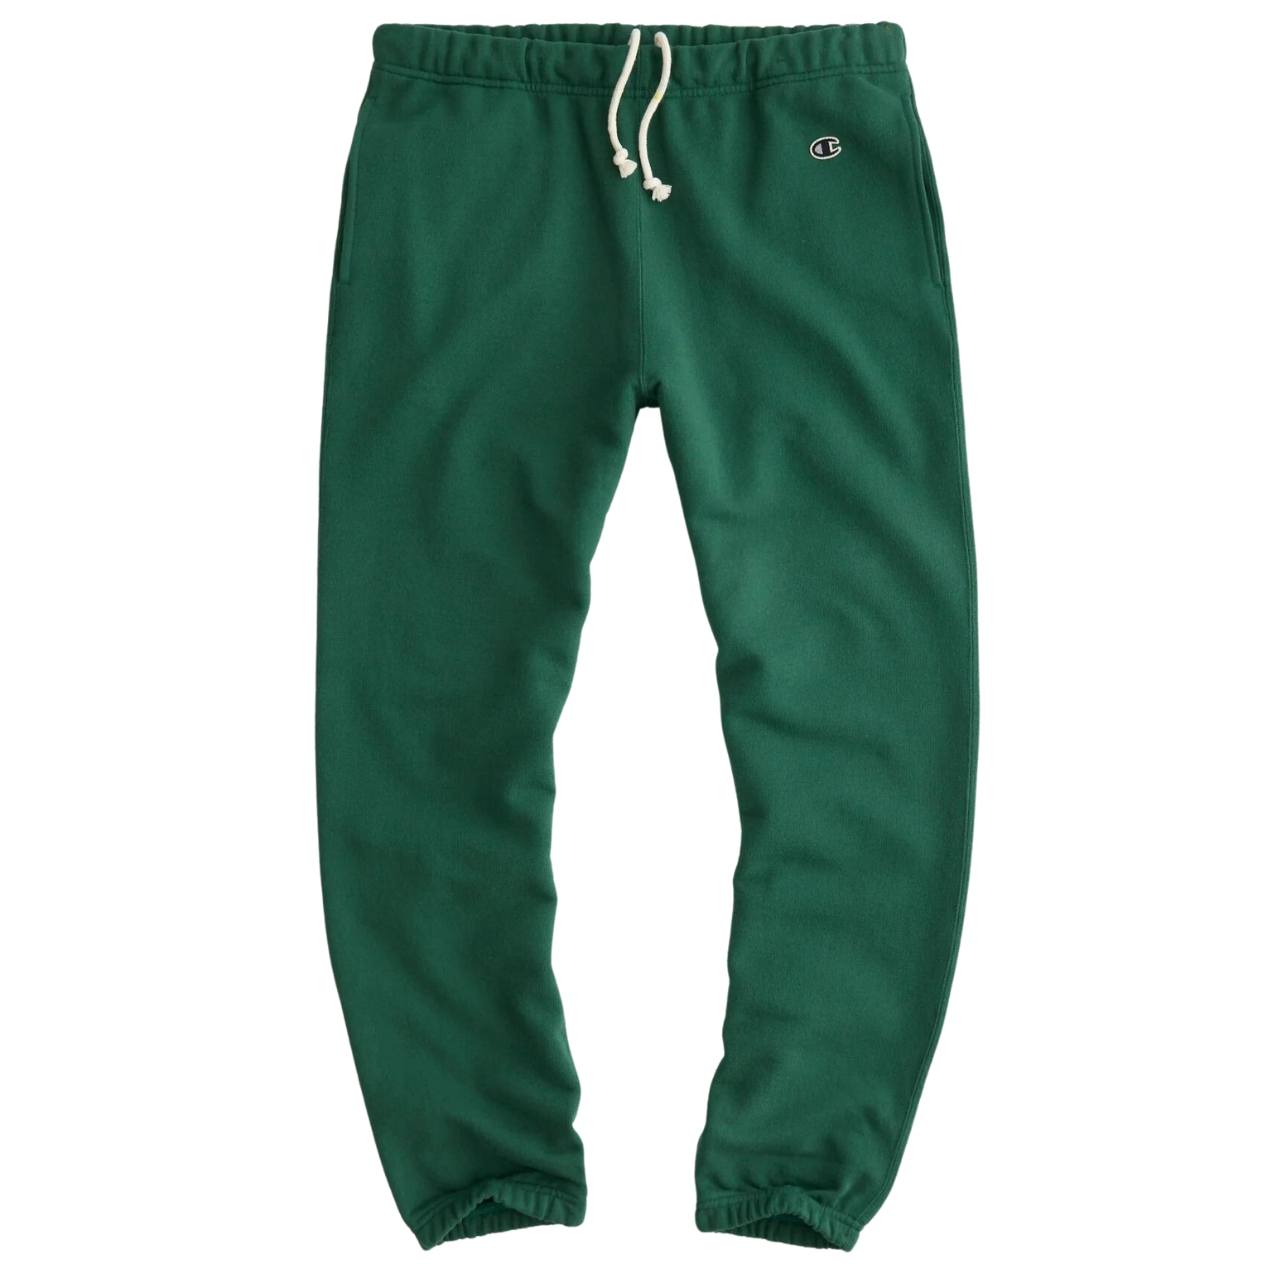 Champion relaxed sweatpants in collegiate green